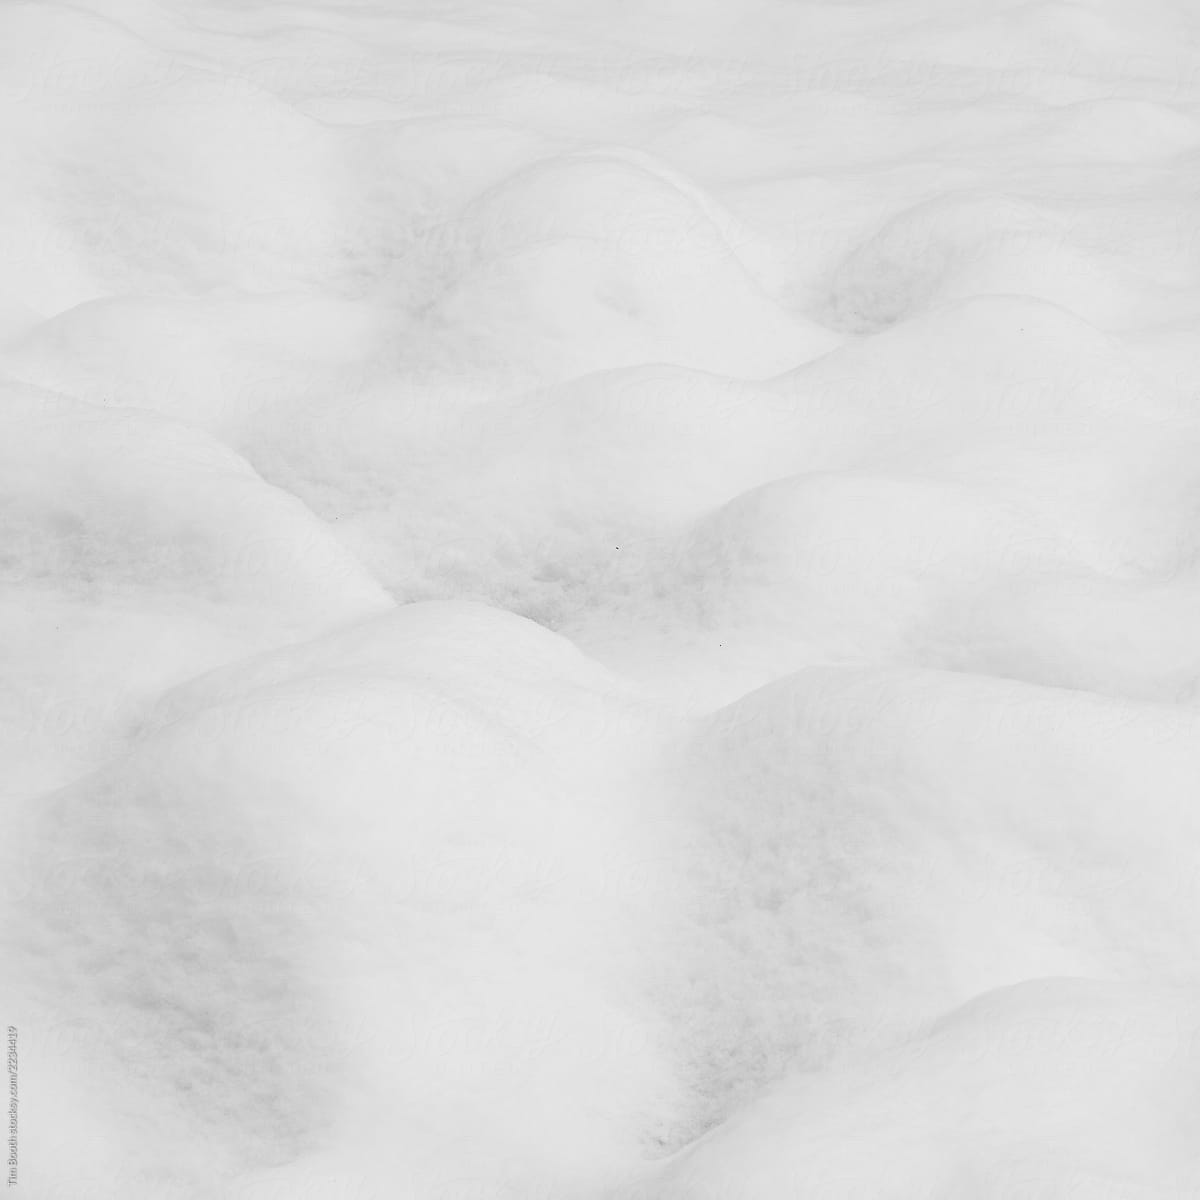 Drifts of snow over a lumpy landscape